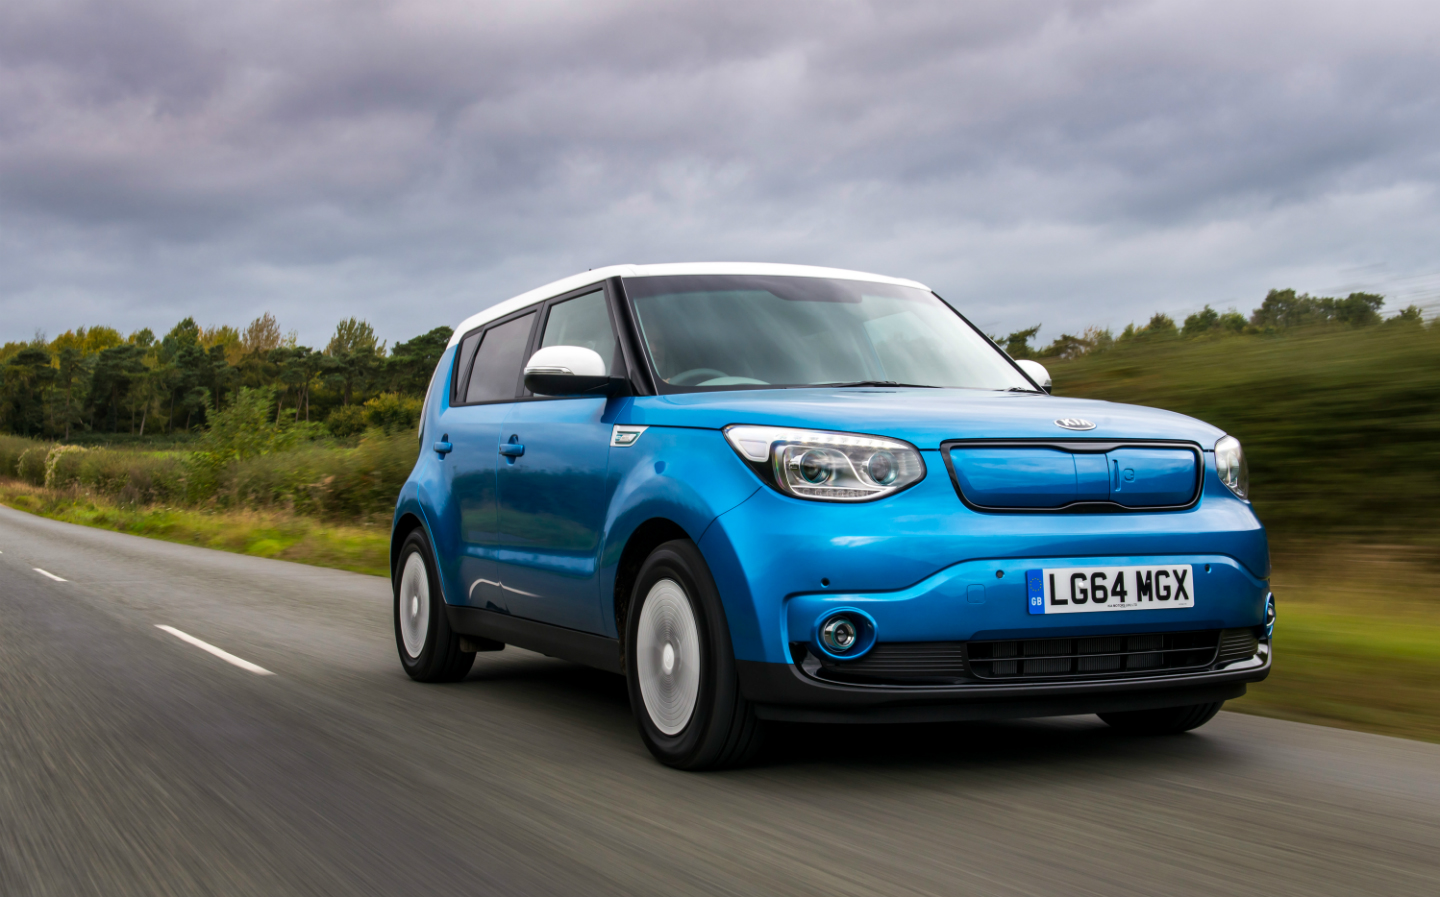 Kia Soul is one of the the best cars to avoid paying road tax (VED)